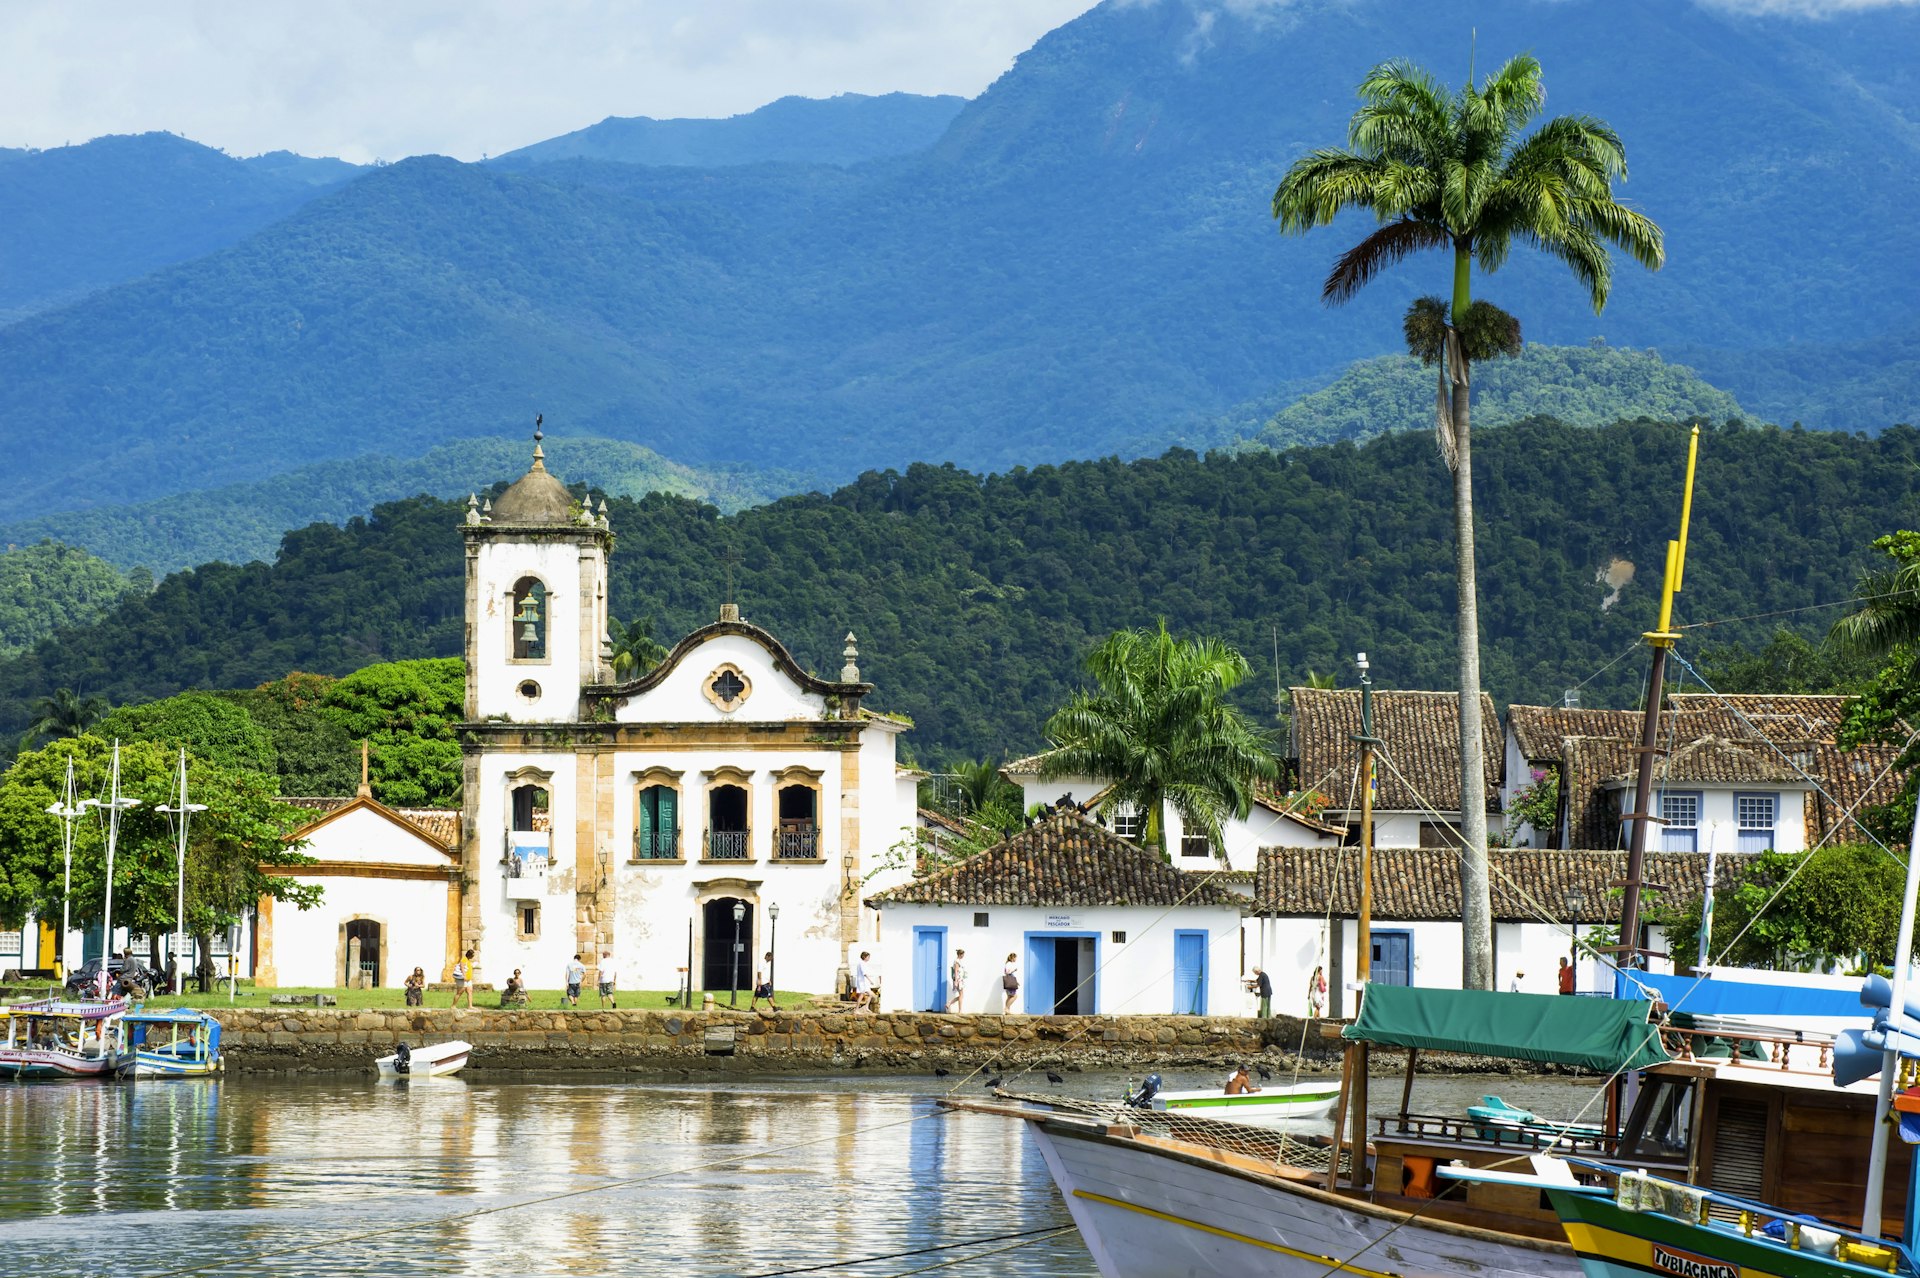 A colonial-era church in Paraty, Brazil, seen from the water, with palm trees and green mountains beyond